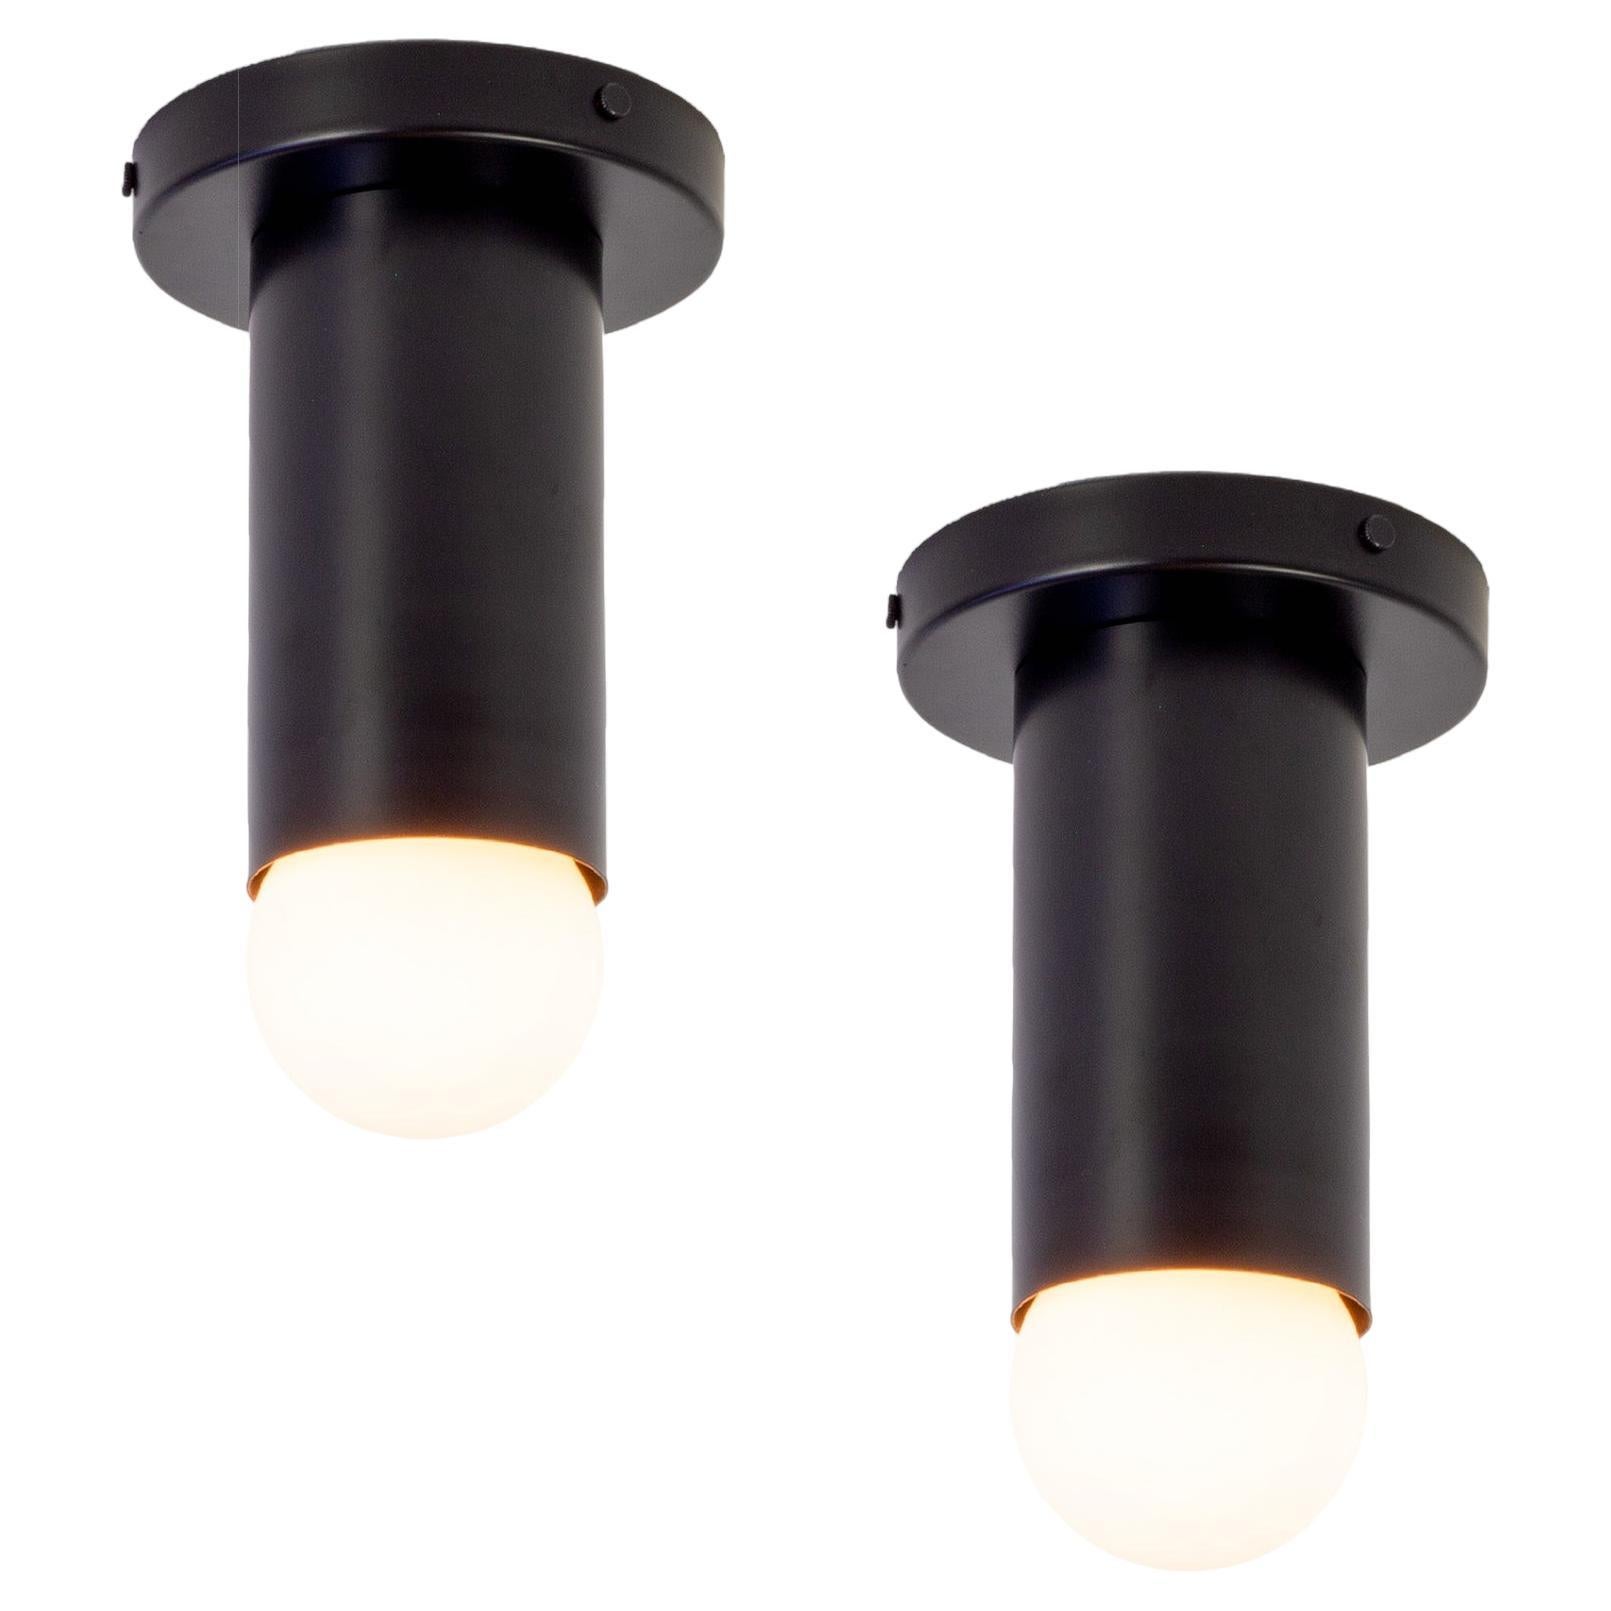 Pair of Deep Flush Mounts by Research.Lighting, Black, Made to Order